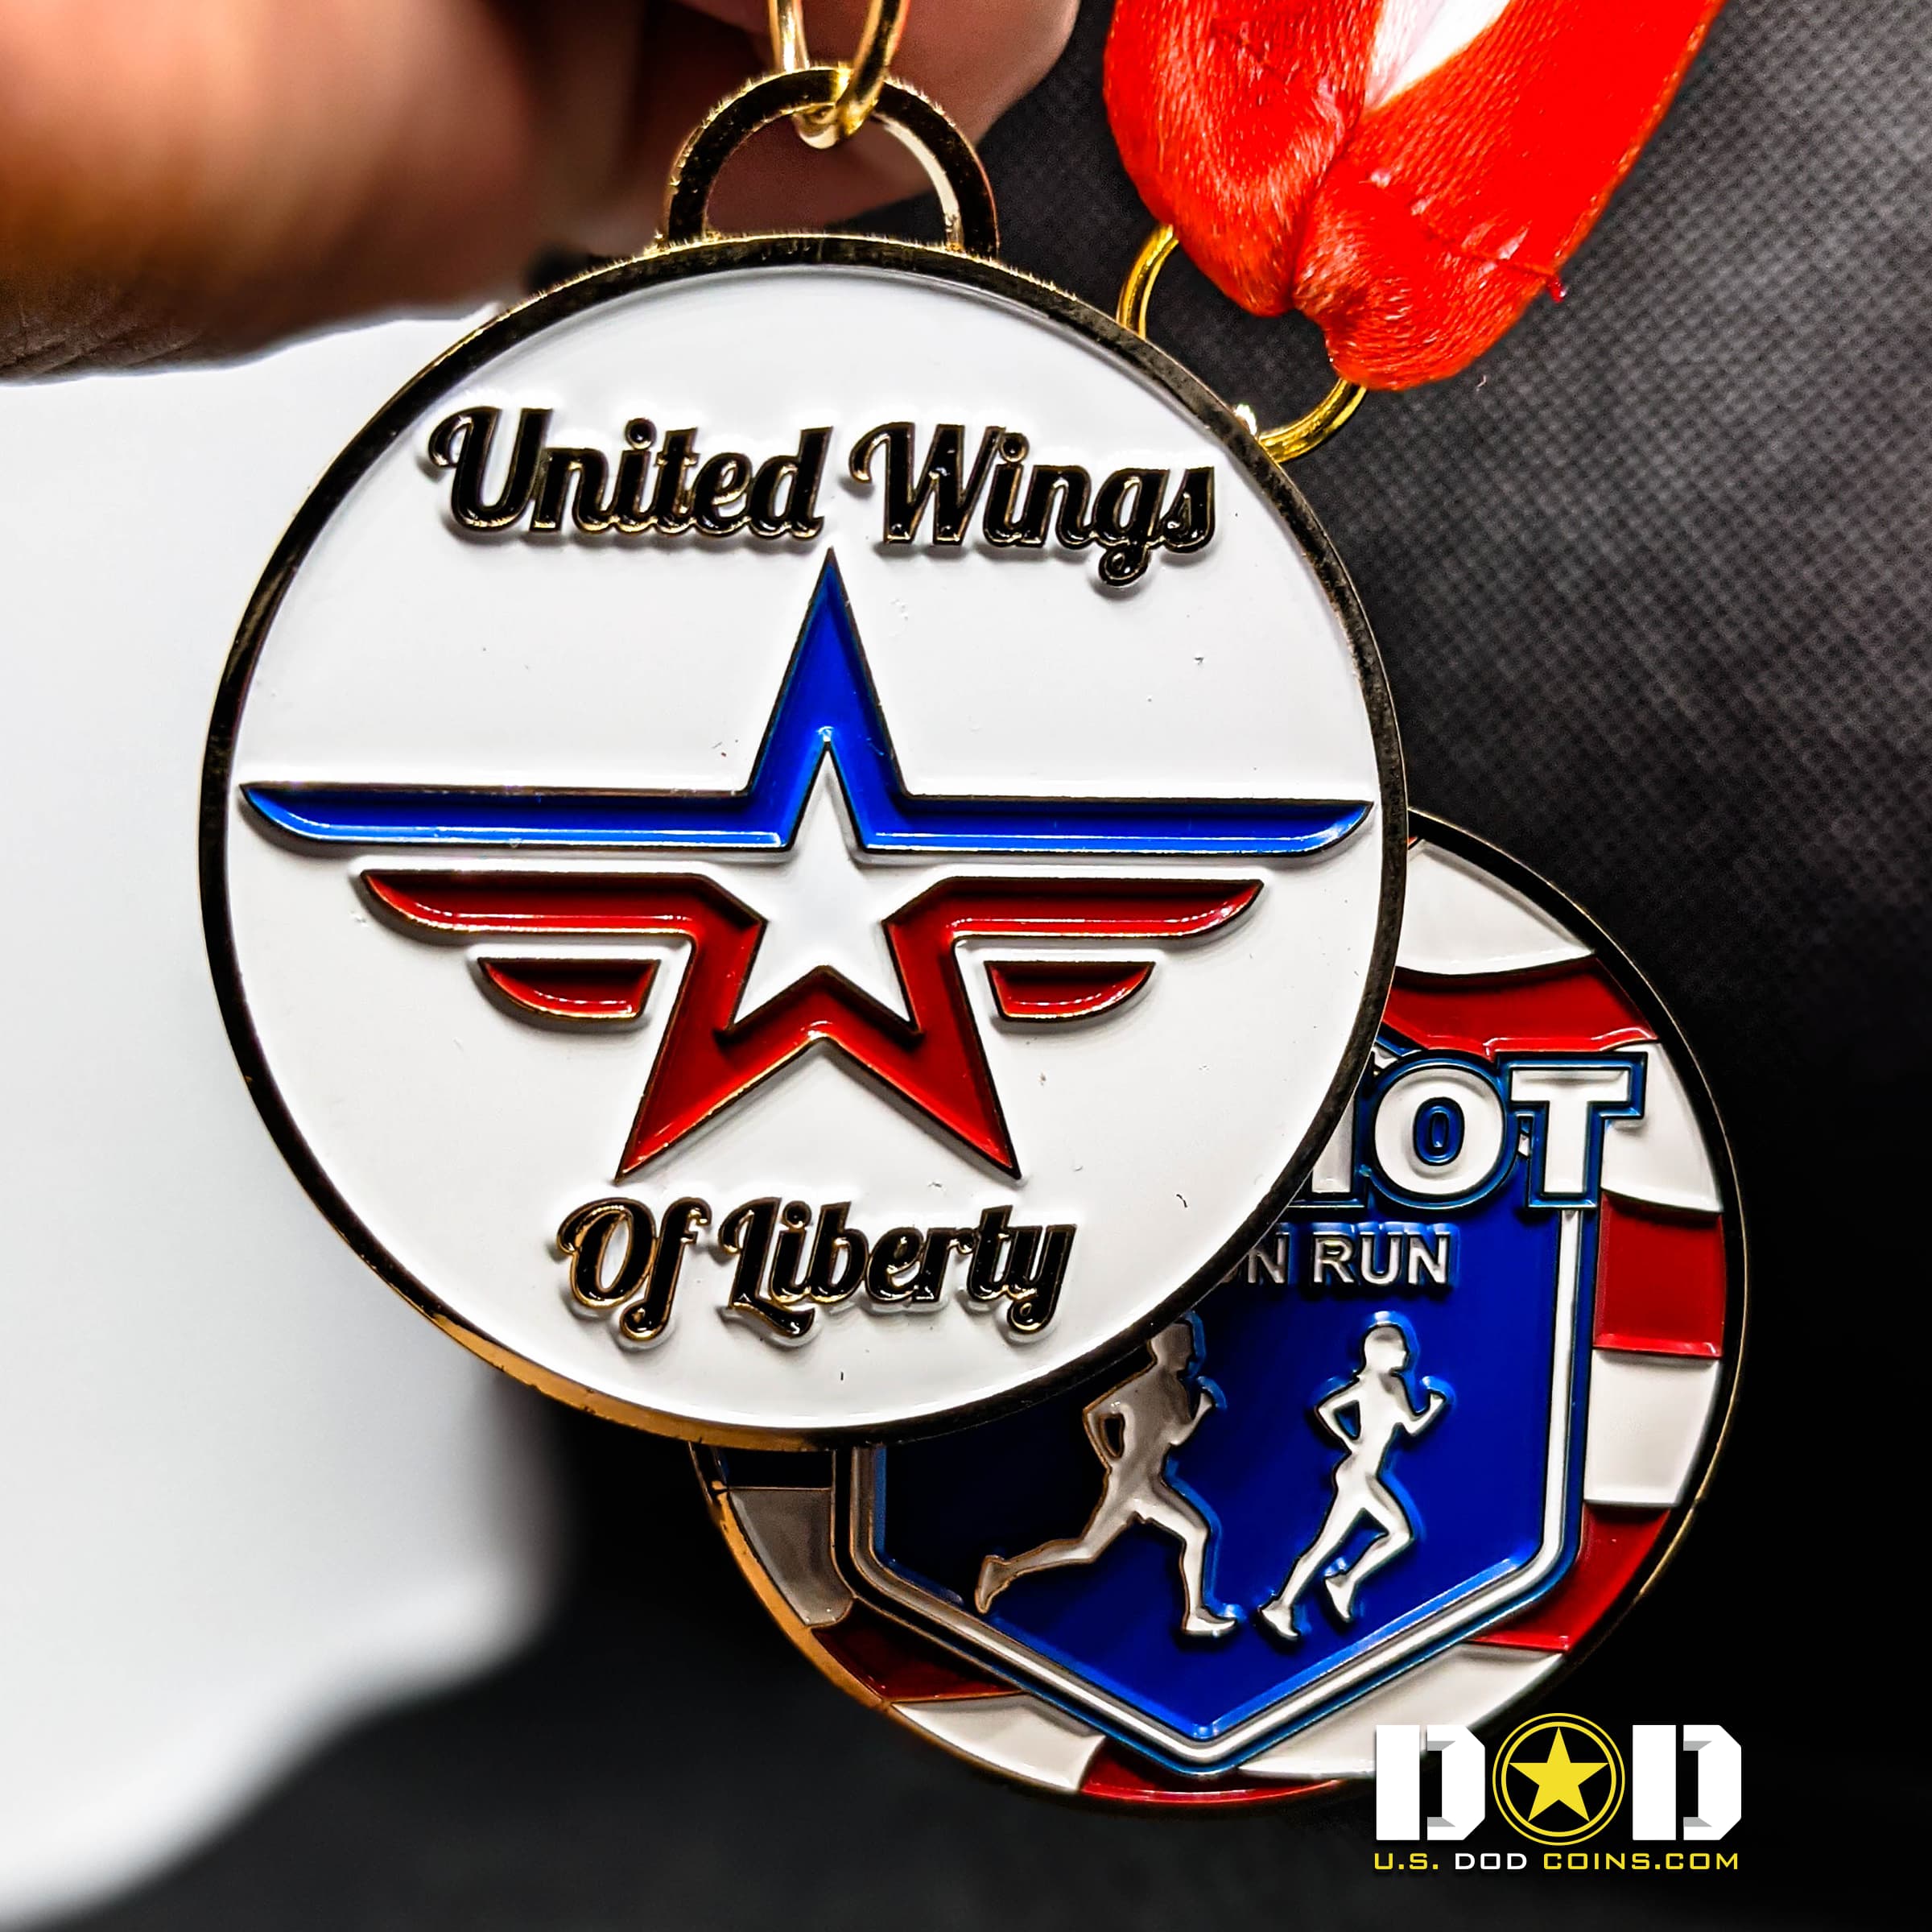 United-Wings-of-Liberty-Patriot-5K-Medal_0005_USDODCoins-Challenge-Coins-Examples-58